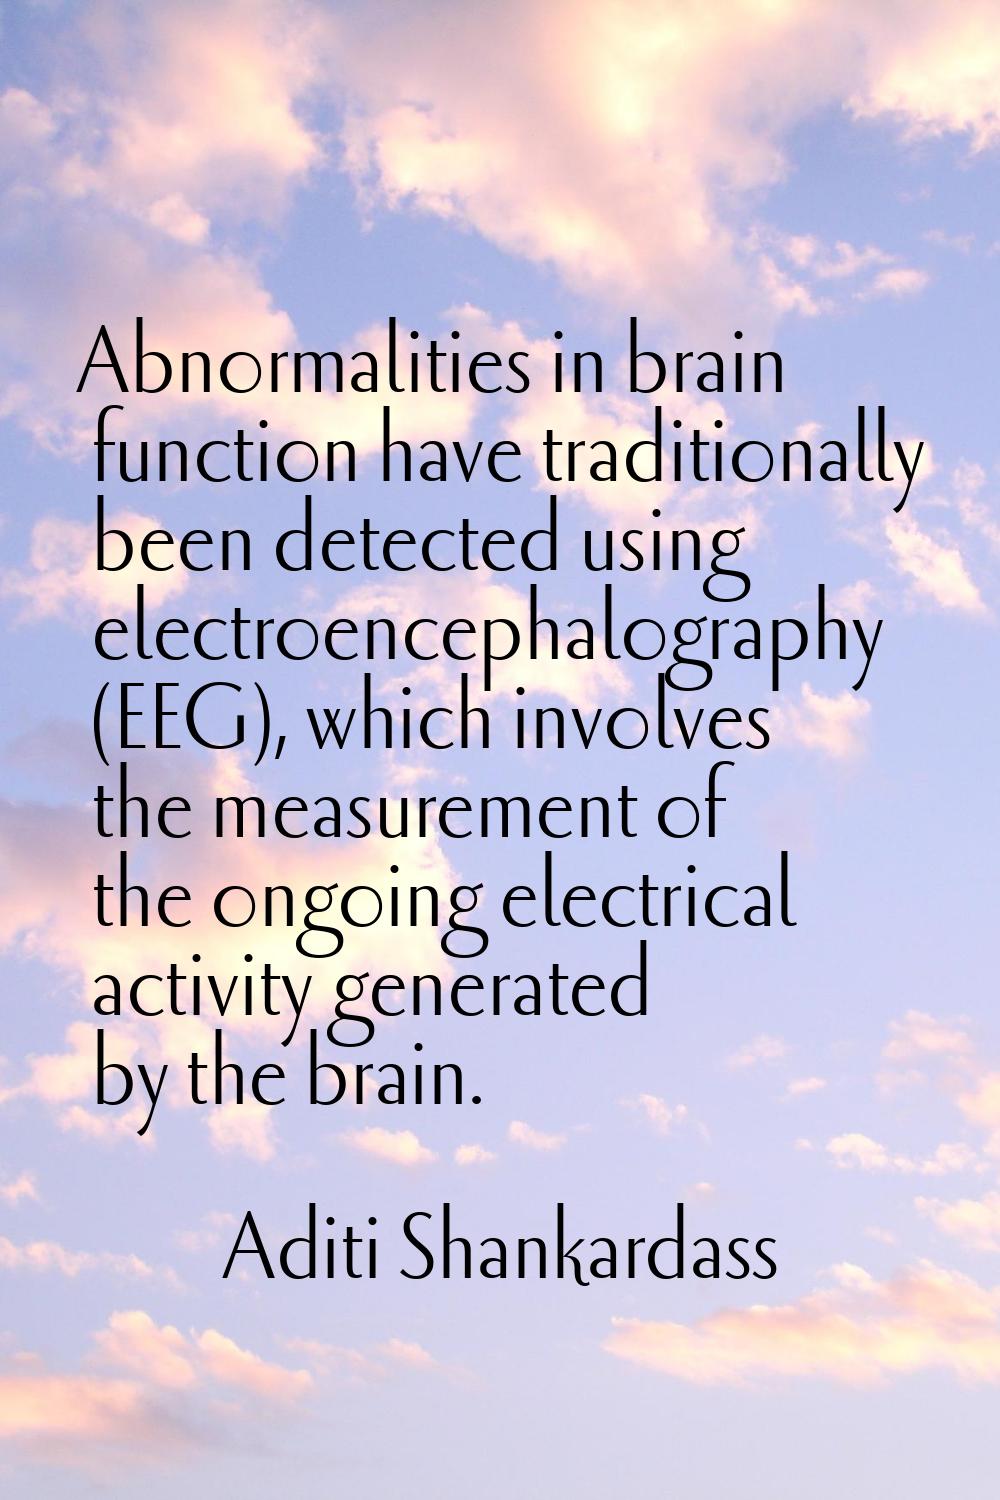 Abnormalities in brain function have traditionally been detected using electroencephalography (EEG)